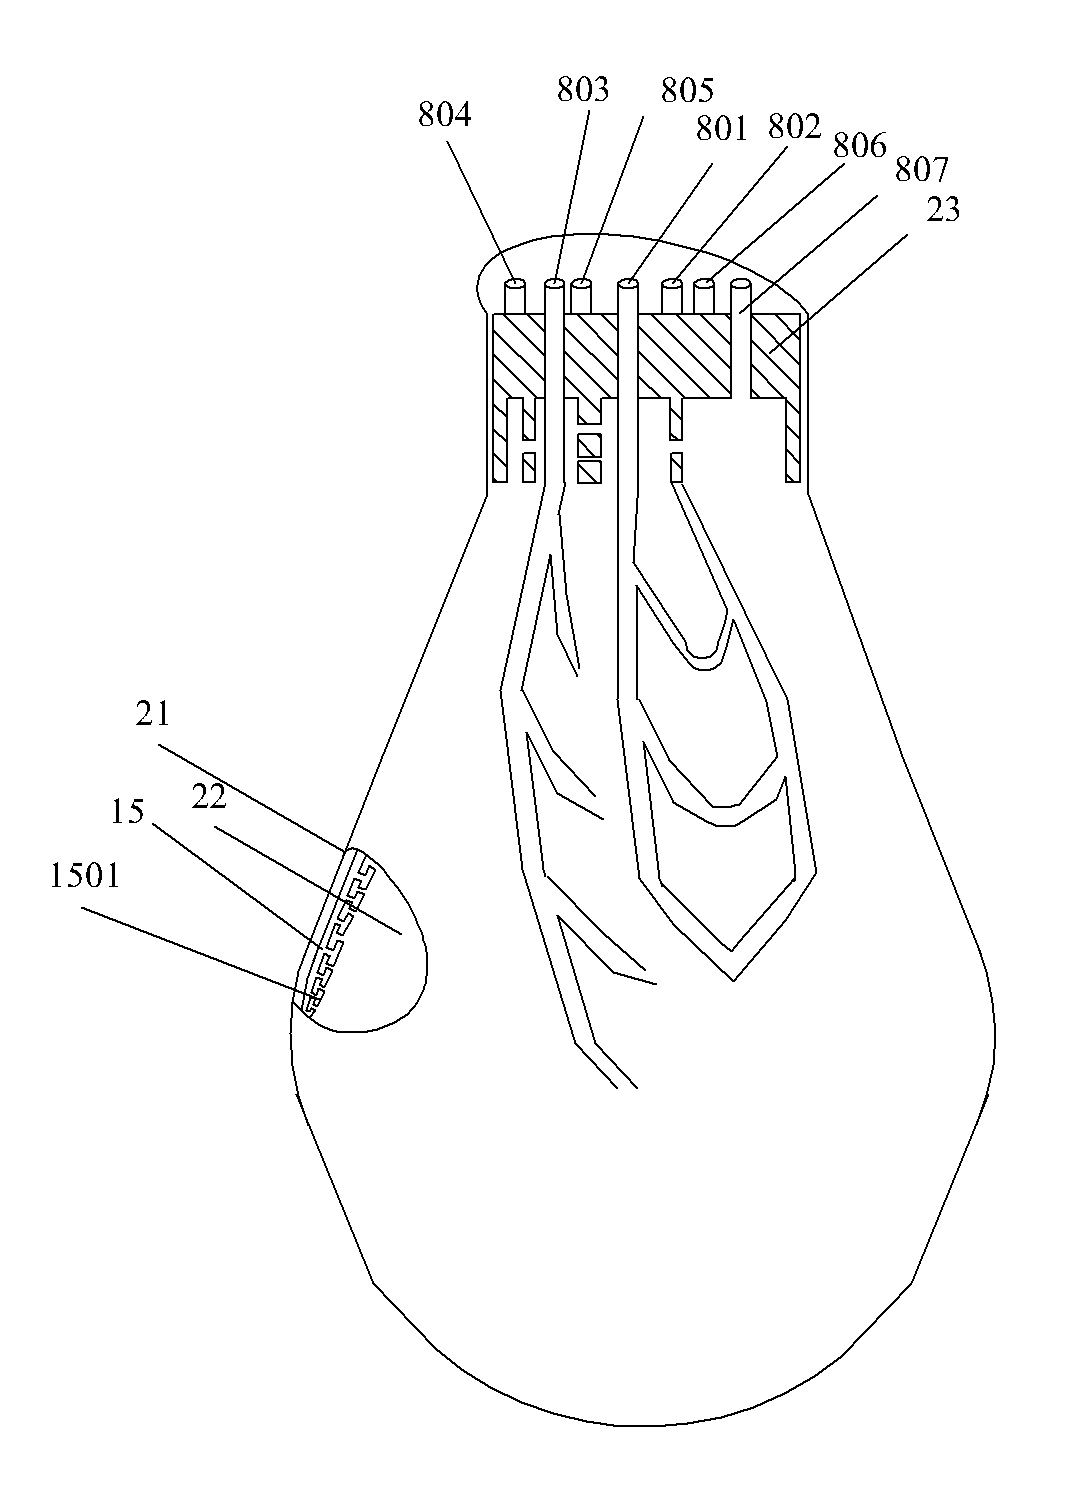 Rotary tissue stress culture system and method